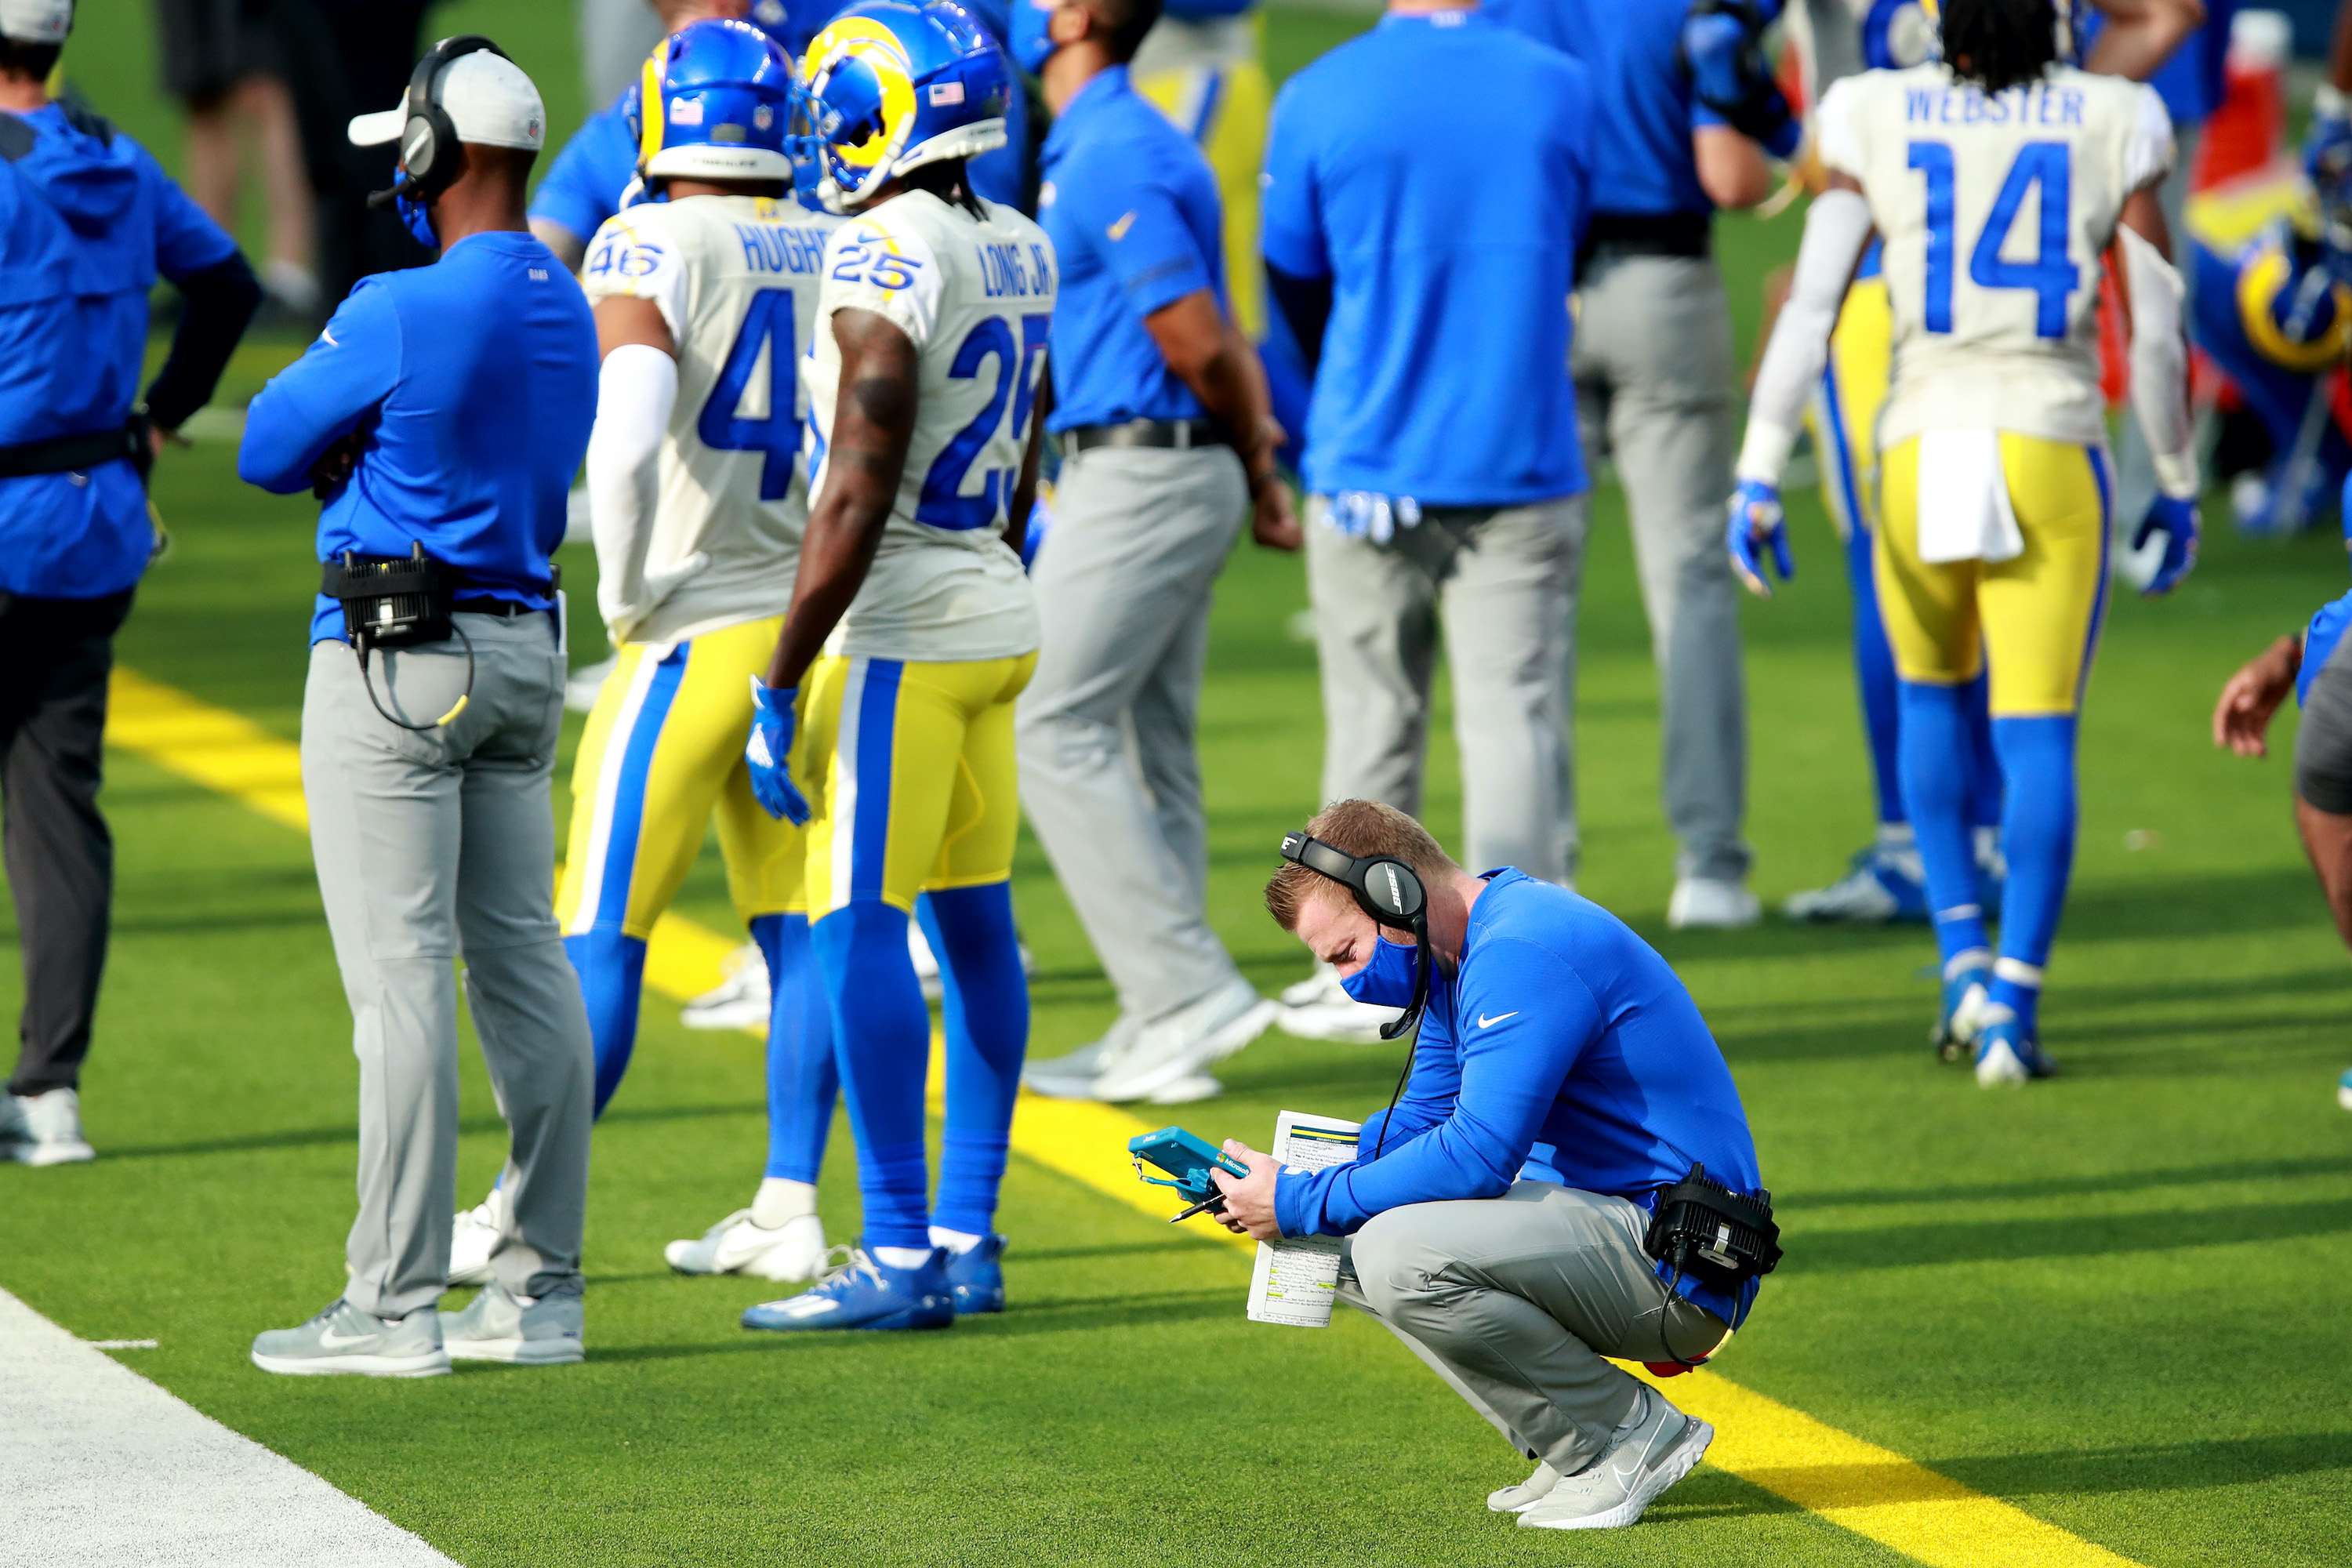 Head coach Sean McVay of the Los Angeles Rams watches a replay during the second quarter of a game against the New York Jets at SoFi Stadium on December 20, 2020 in Inglewood, California.